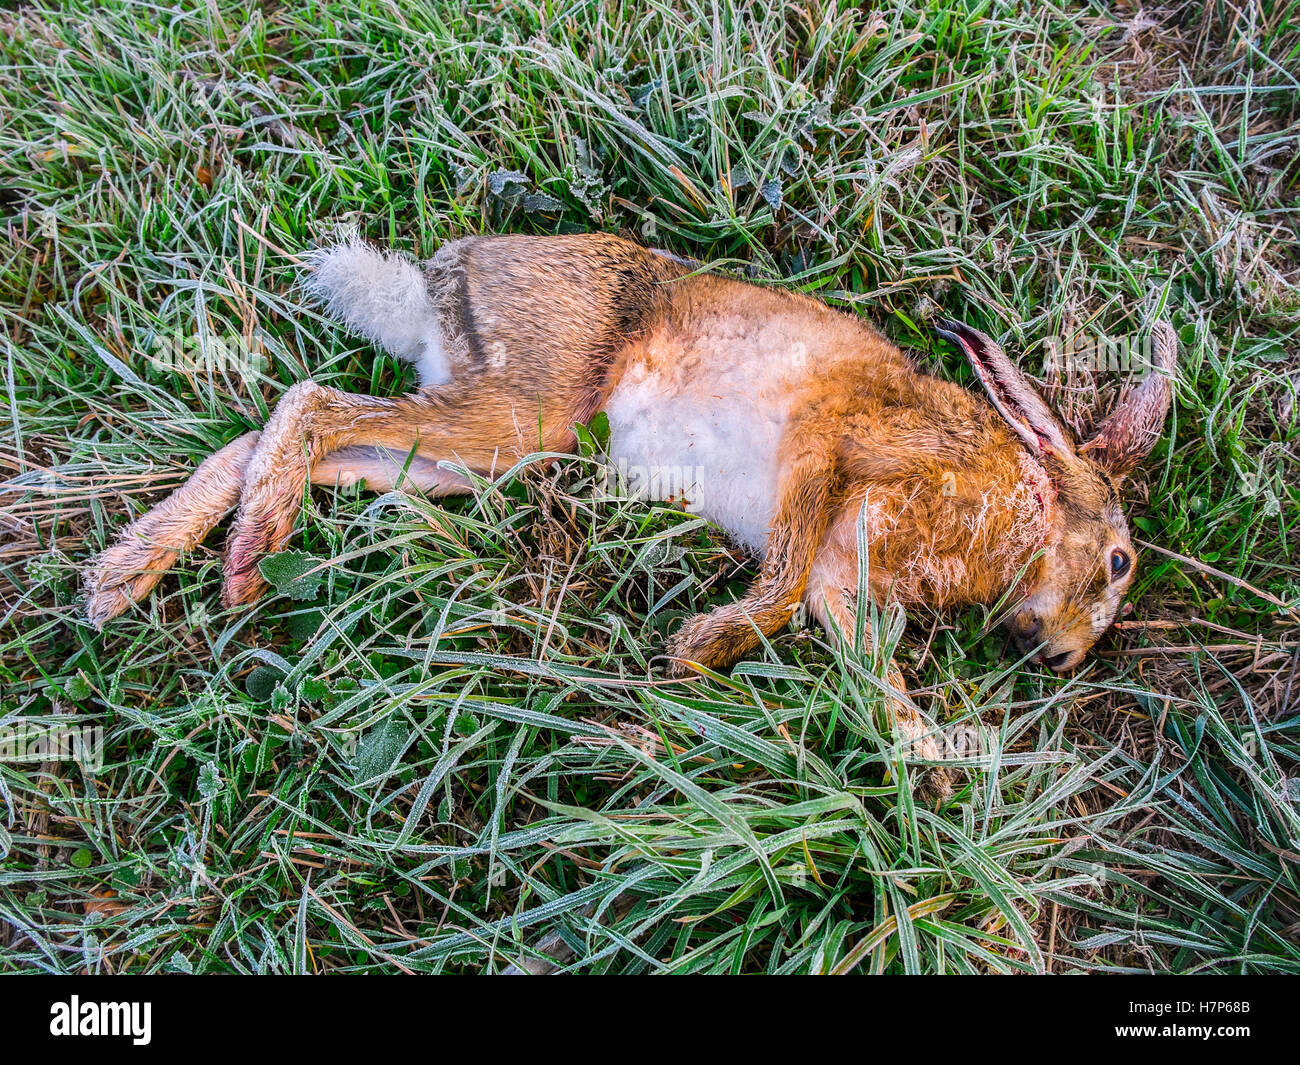 Dead Hare on roadside verge / accident victim - France. Stock Photo